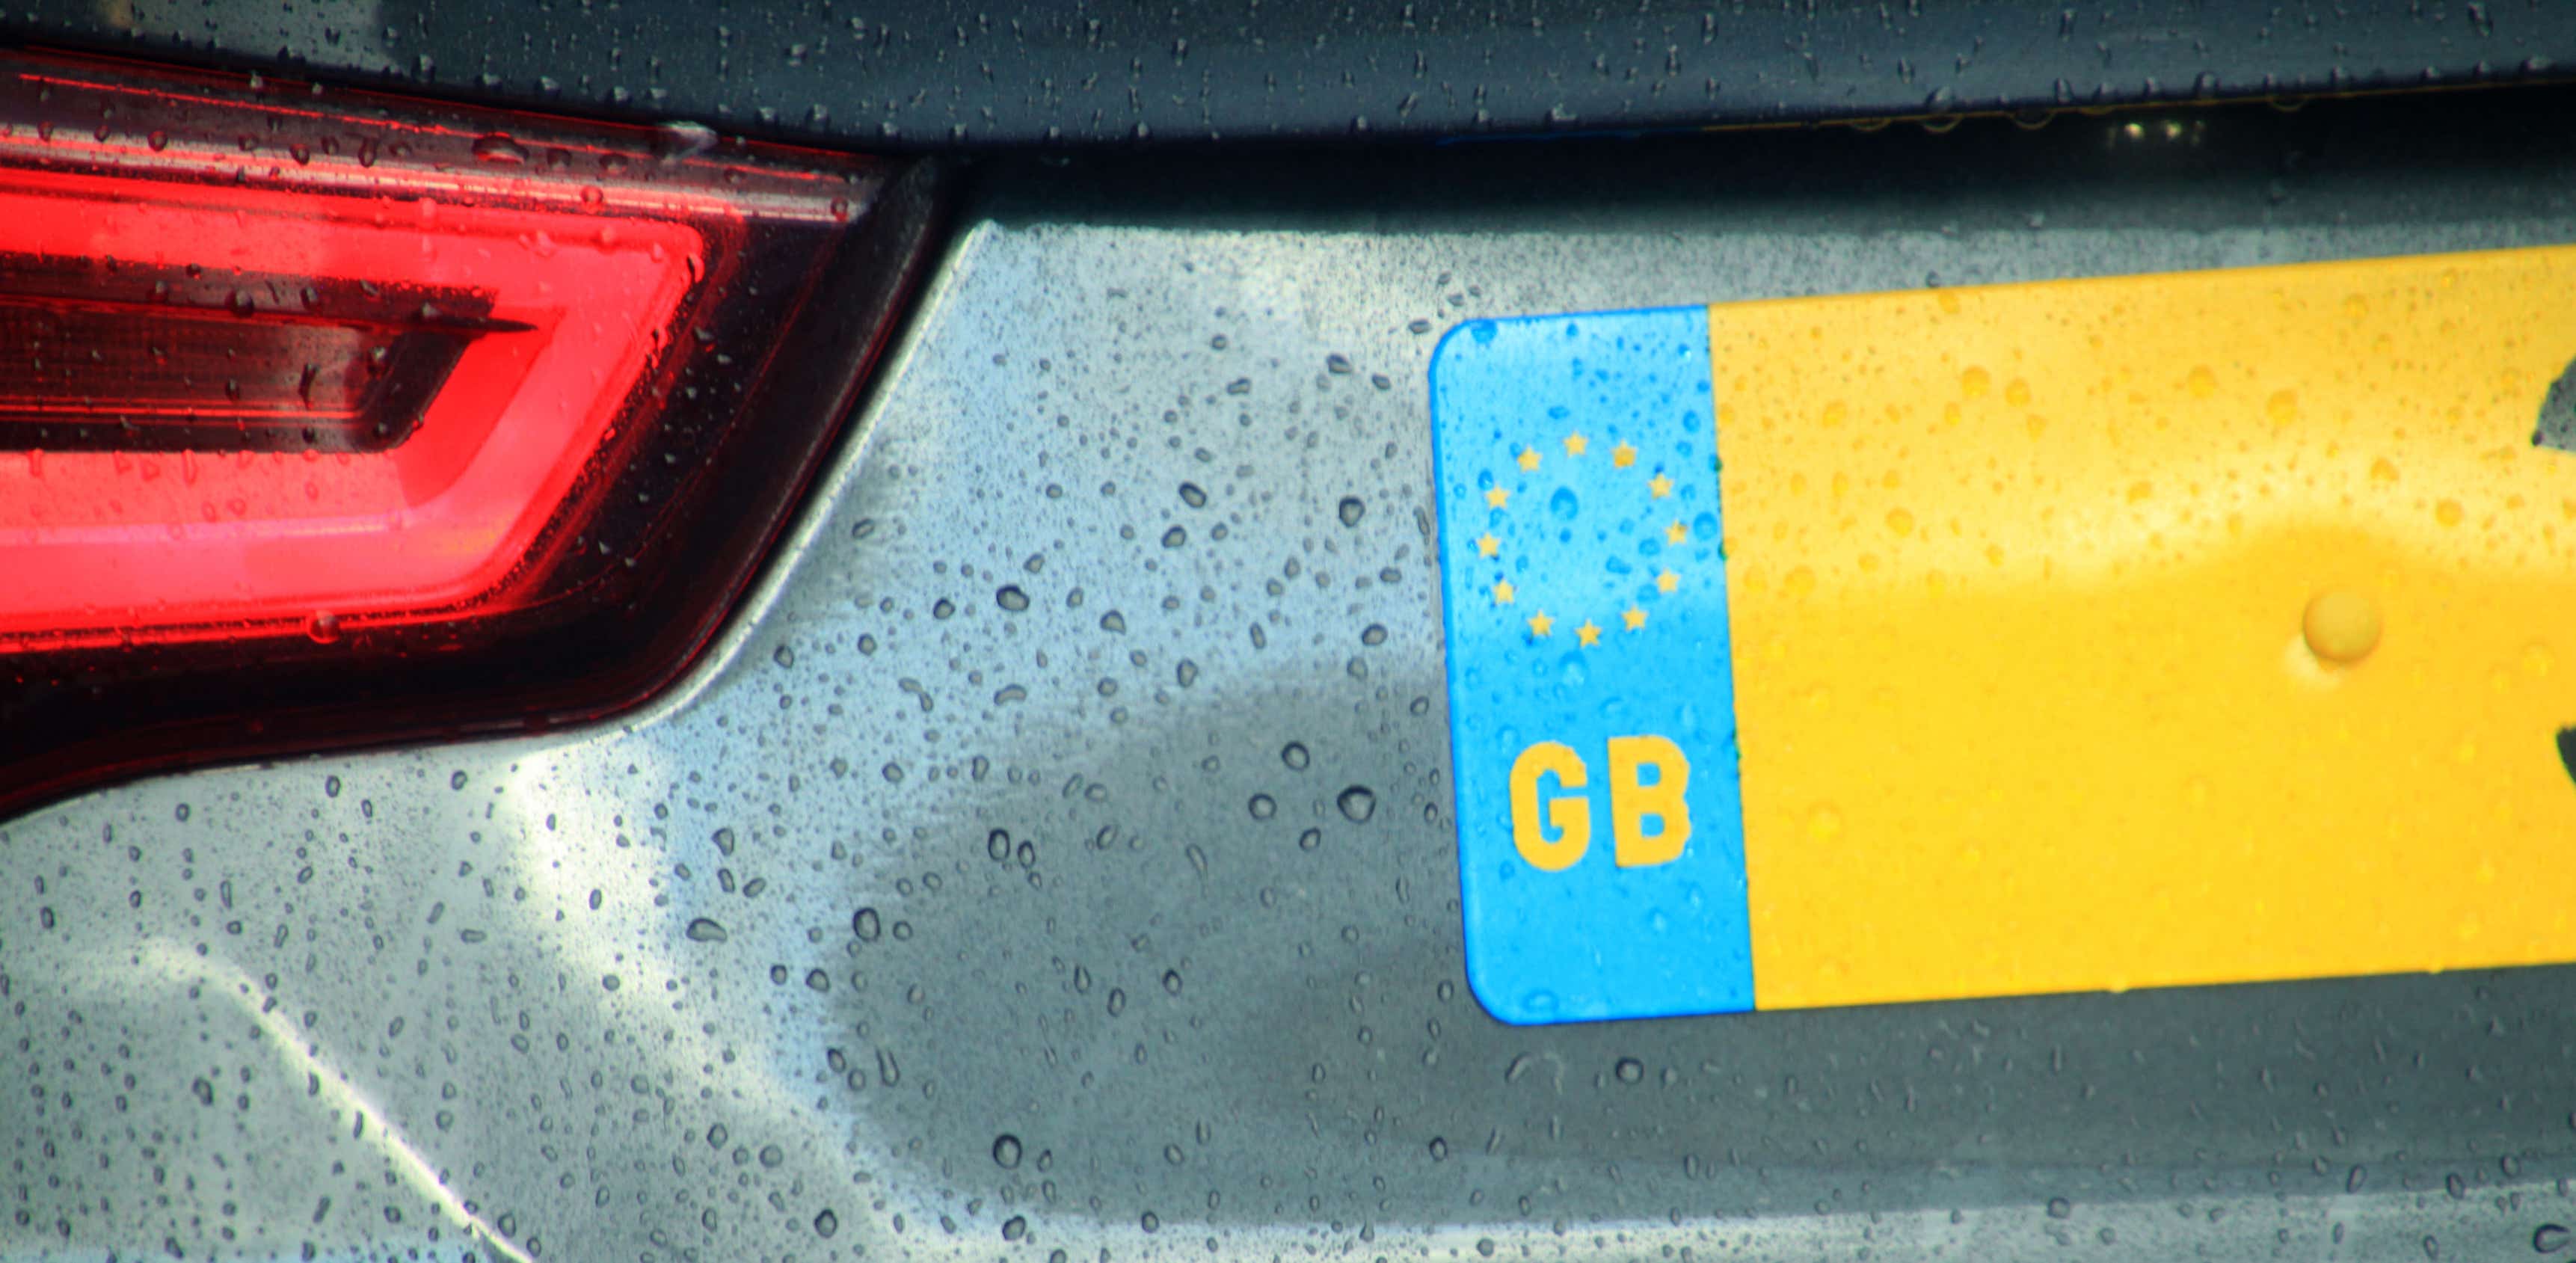 GB Number plate 